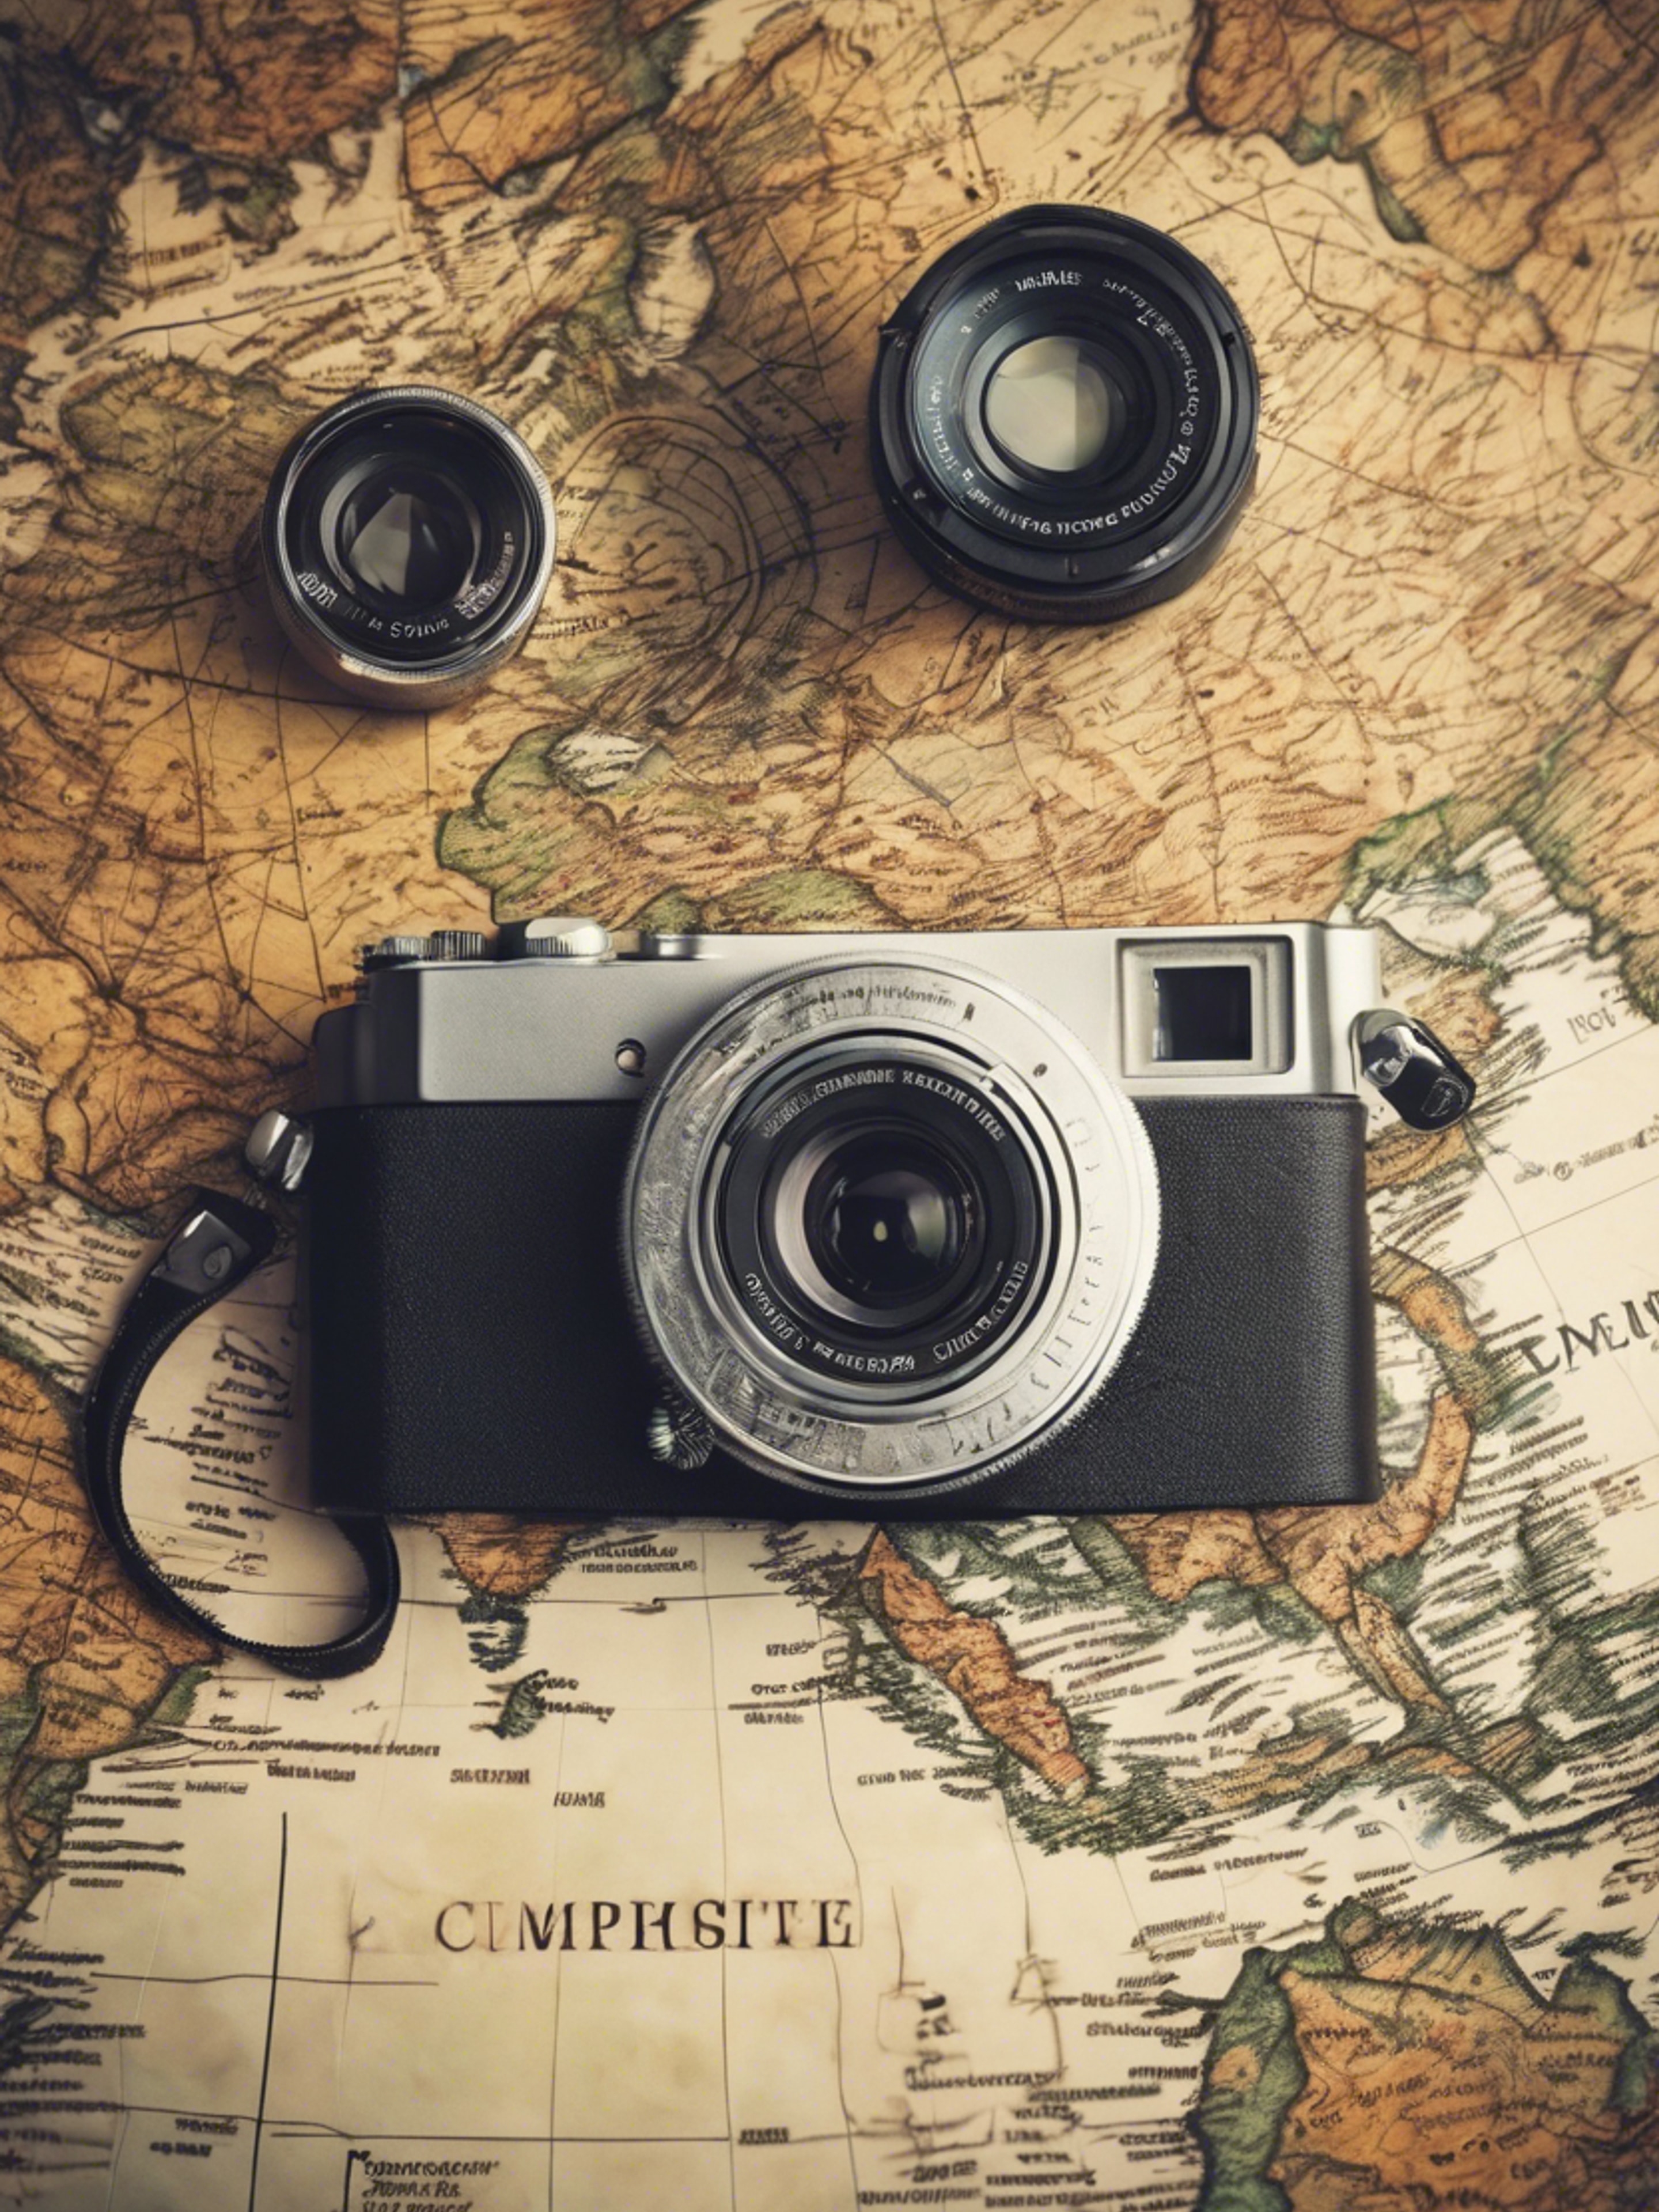 A compact camera with vintage design, placed on a world map to convey the spirit of travel. Дэлгэцийн зураг[89e32525bdc346769ef4]